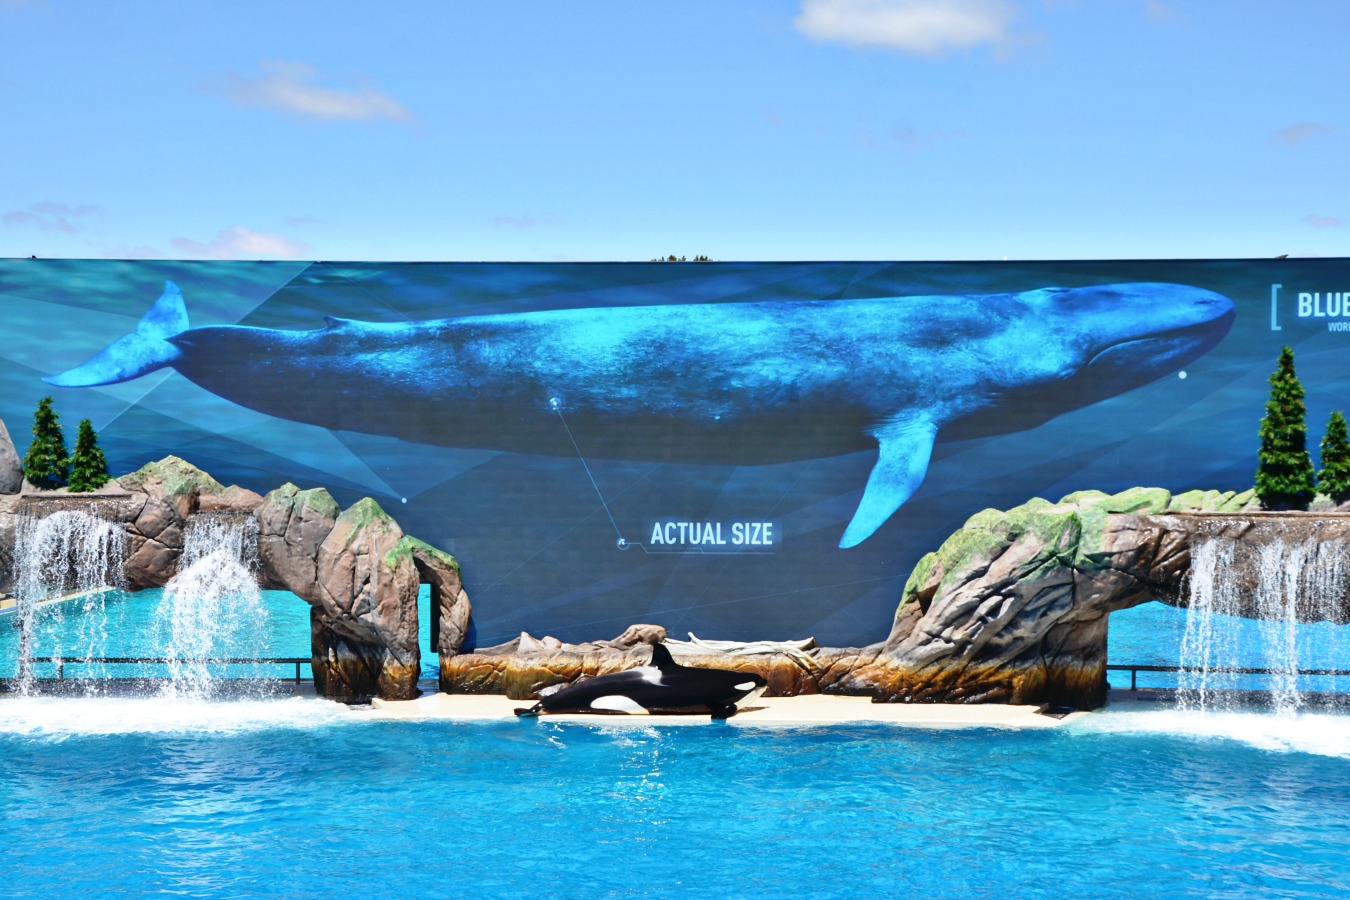 The new Orca Encounter at SeaWorld San Diego is a stunning educational presentation providing a greater understanding of whales in the wild and research.